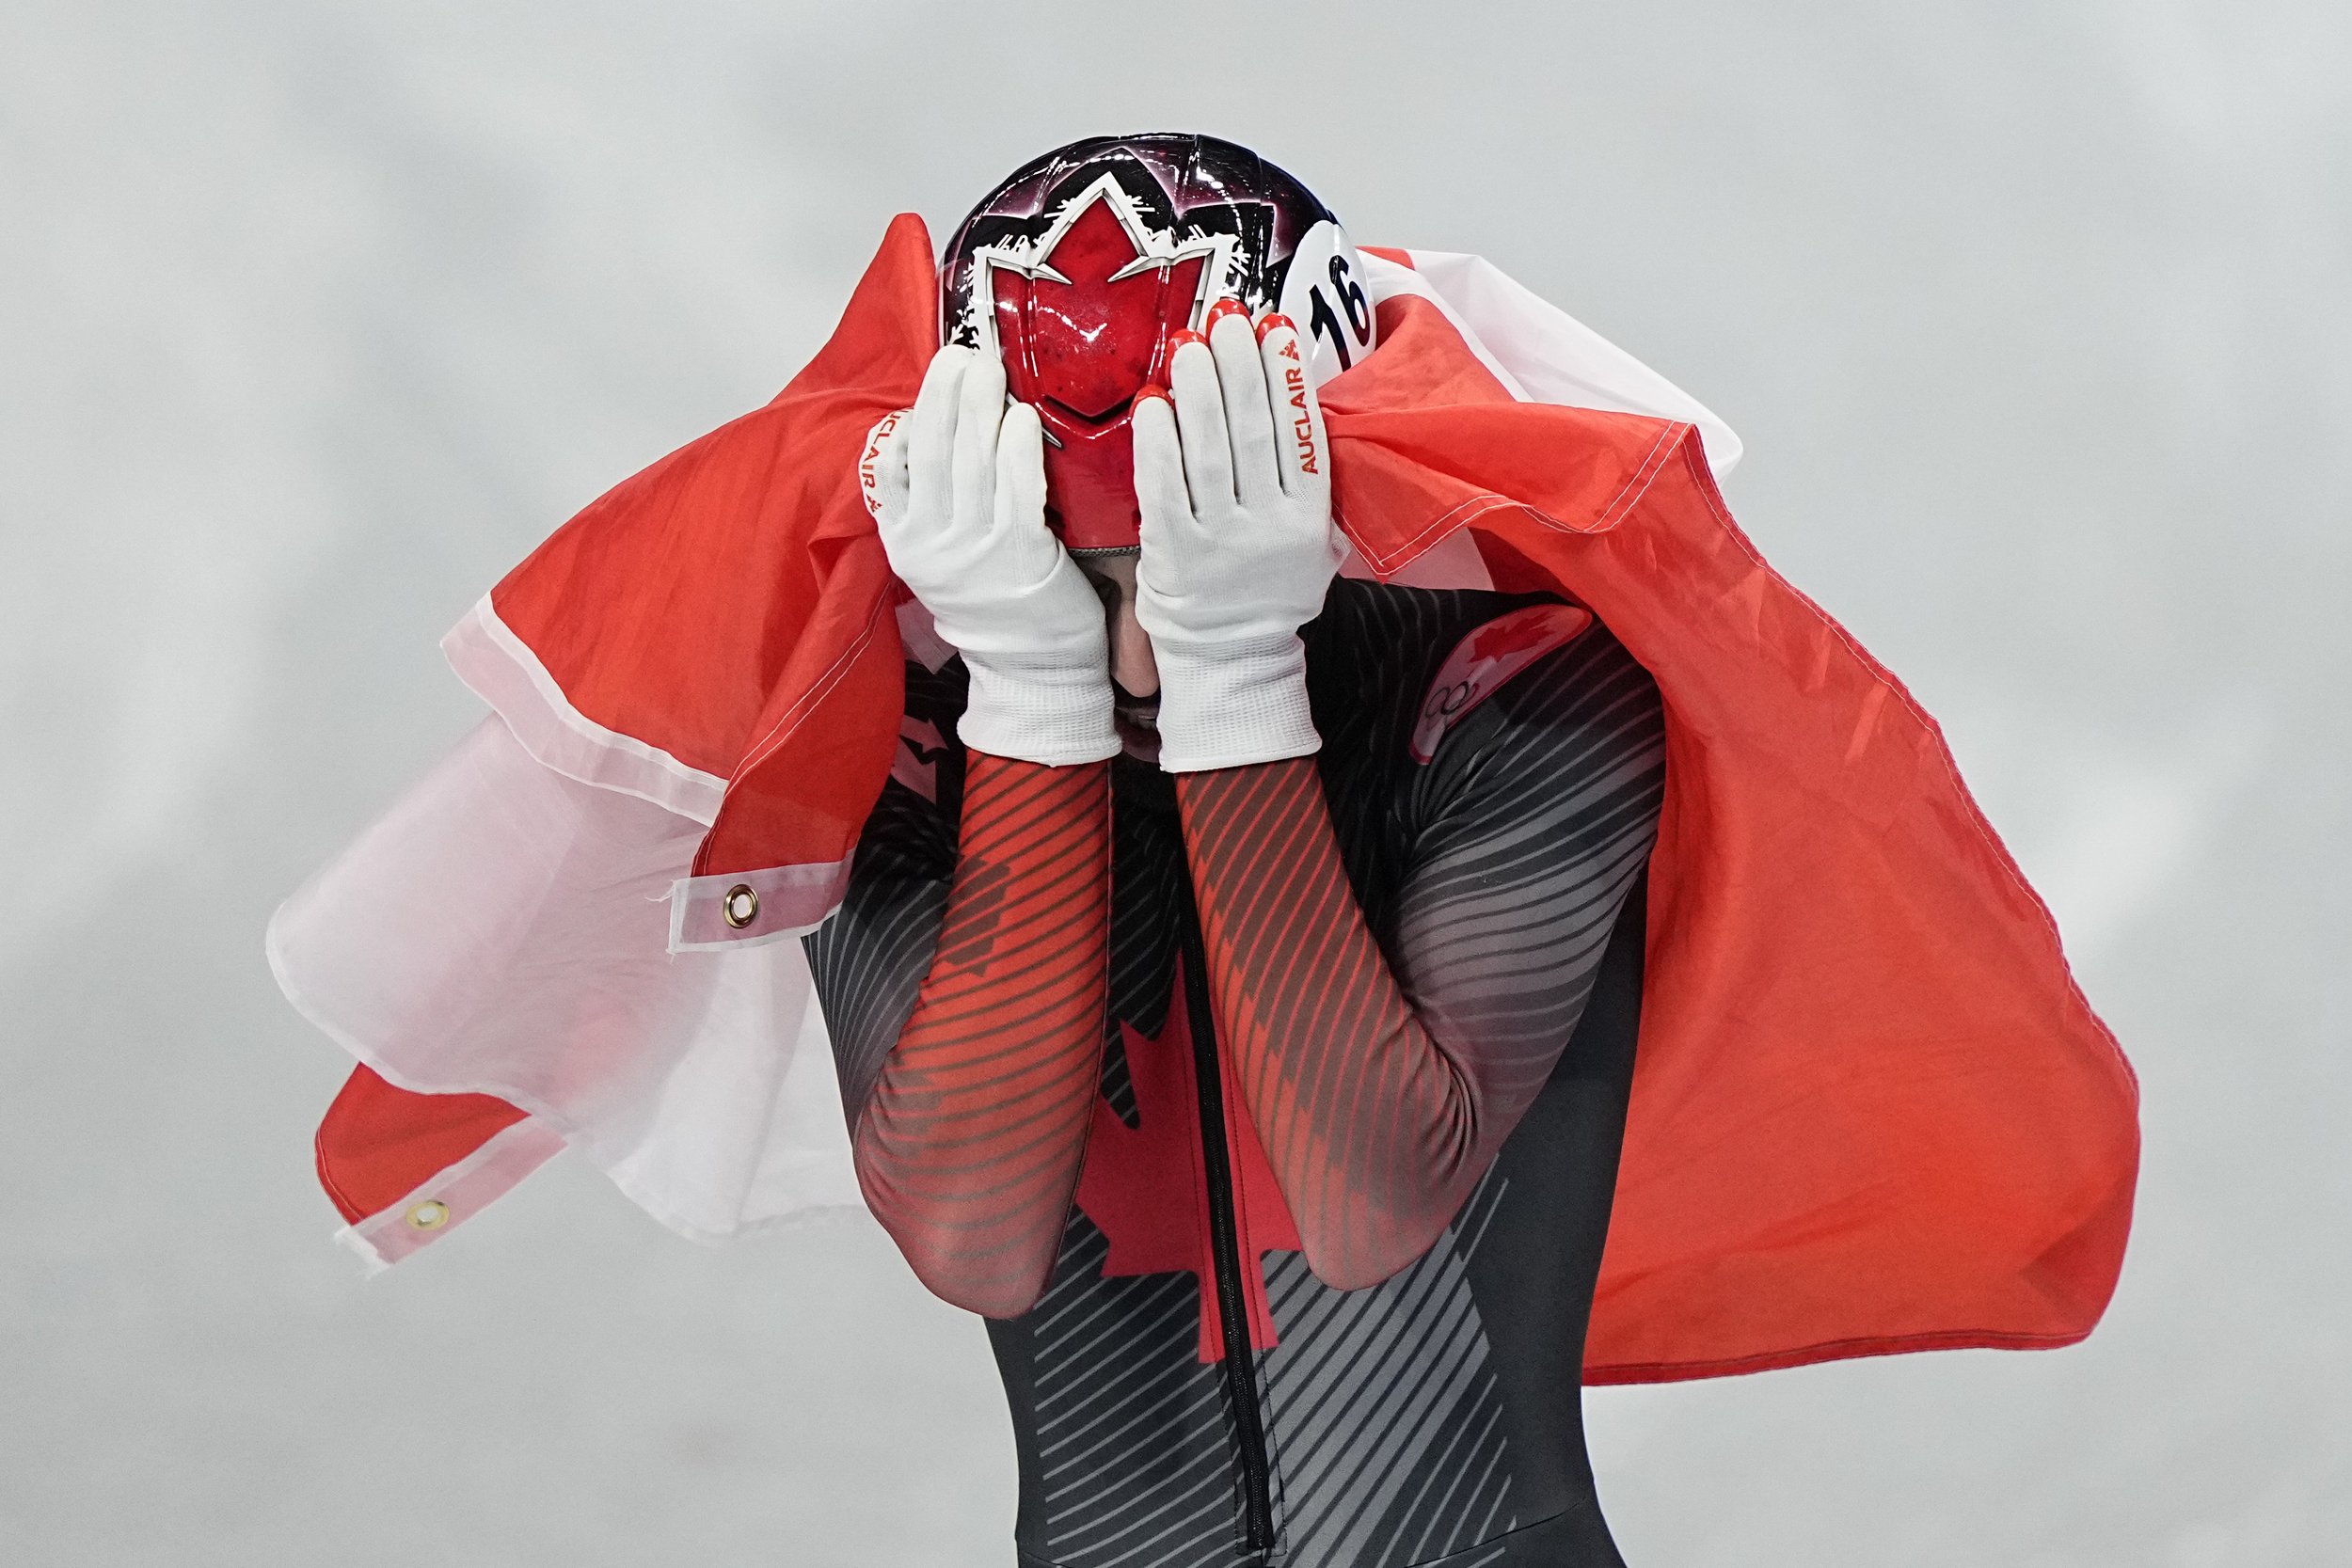  Steven Dubois, of Canada, reacts after his second place finish in the men's 1500-meters final during the short track speedskating competition at the 2022 Winter Olympics, Wednesday, Feb. 9, 2022, in Beijing. (AP Photo/David J. Phillip) 